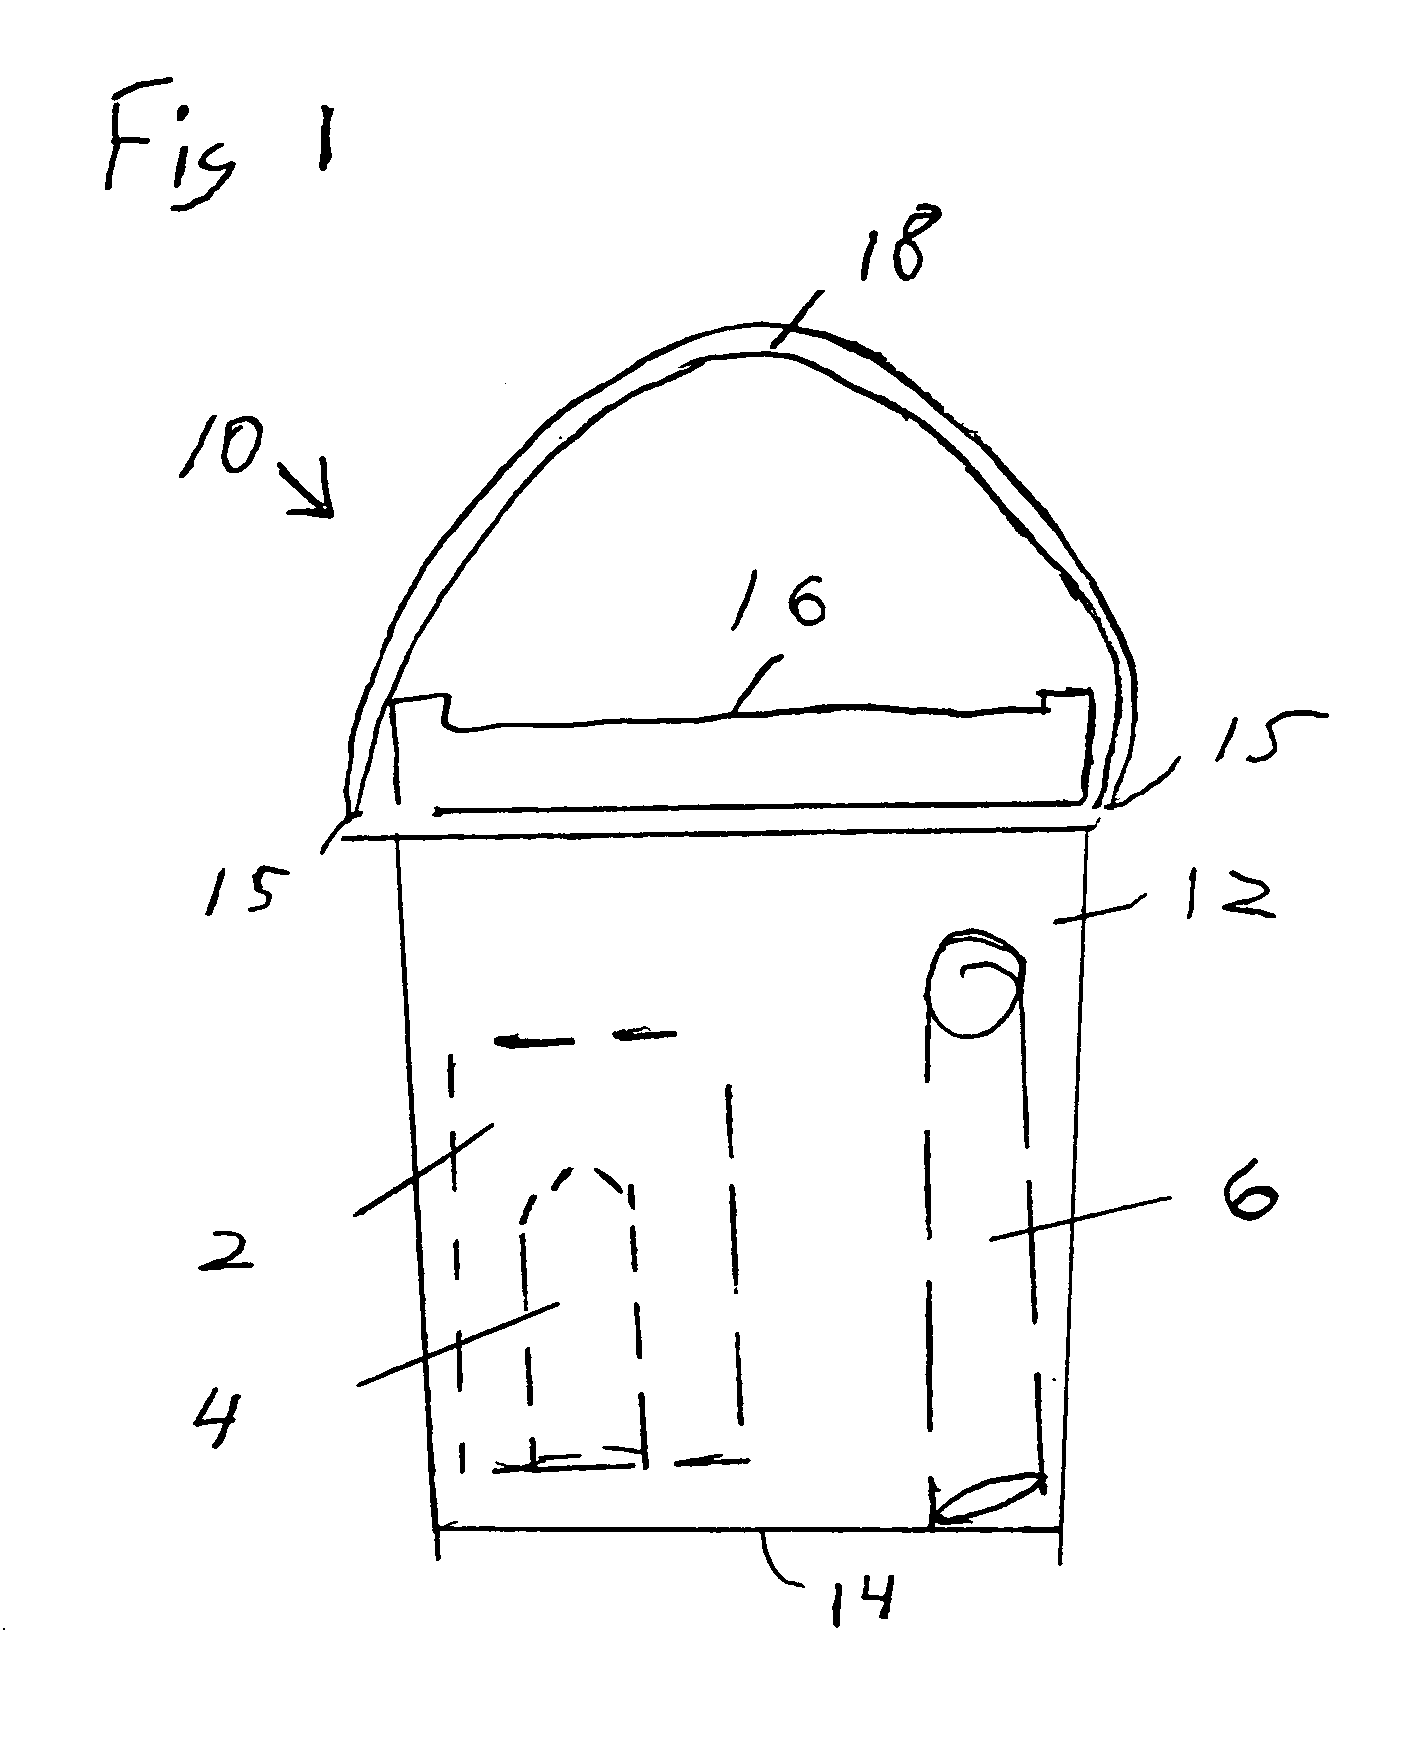 Carriable storage bucket for supporting a raised umbrella